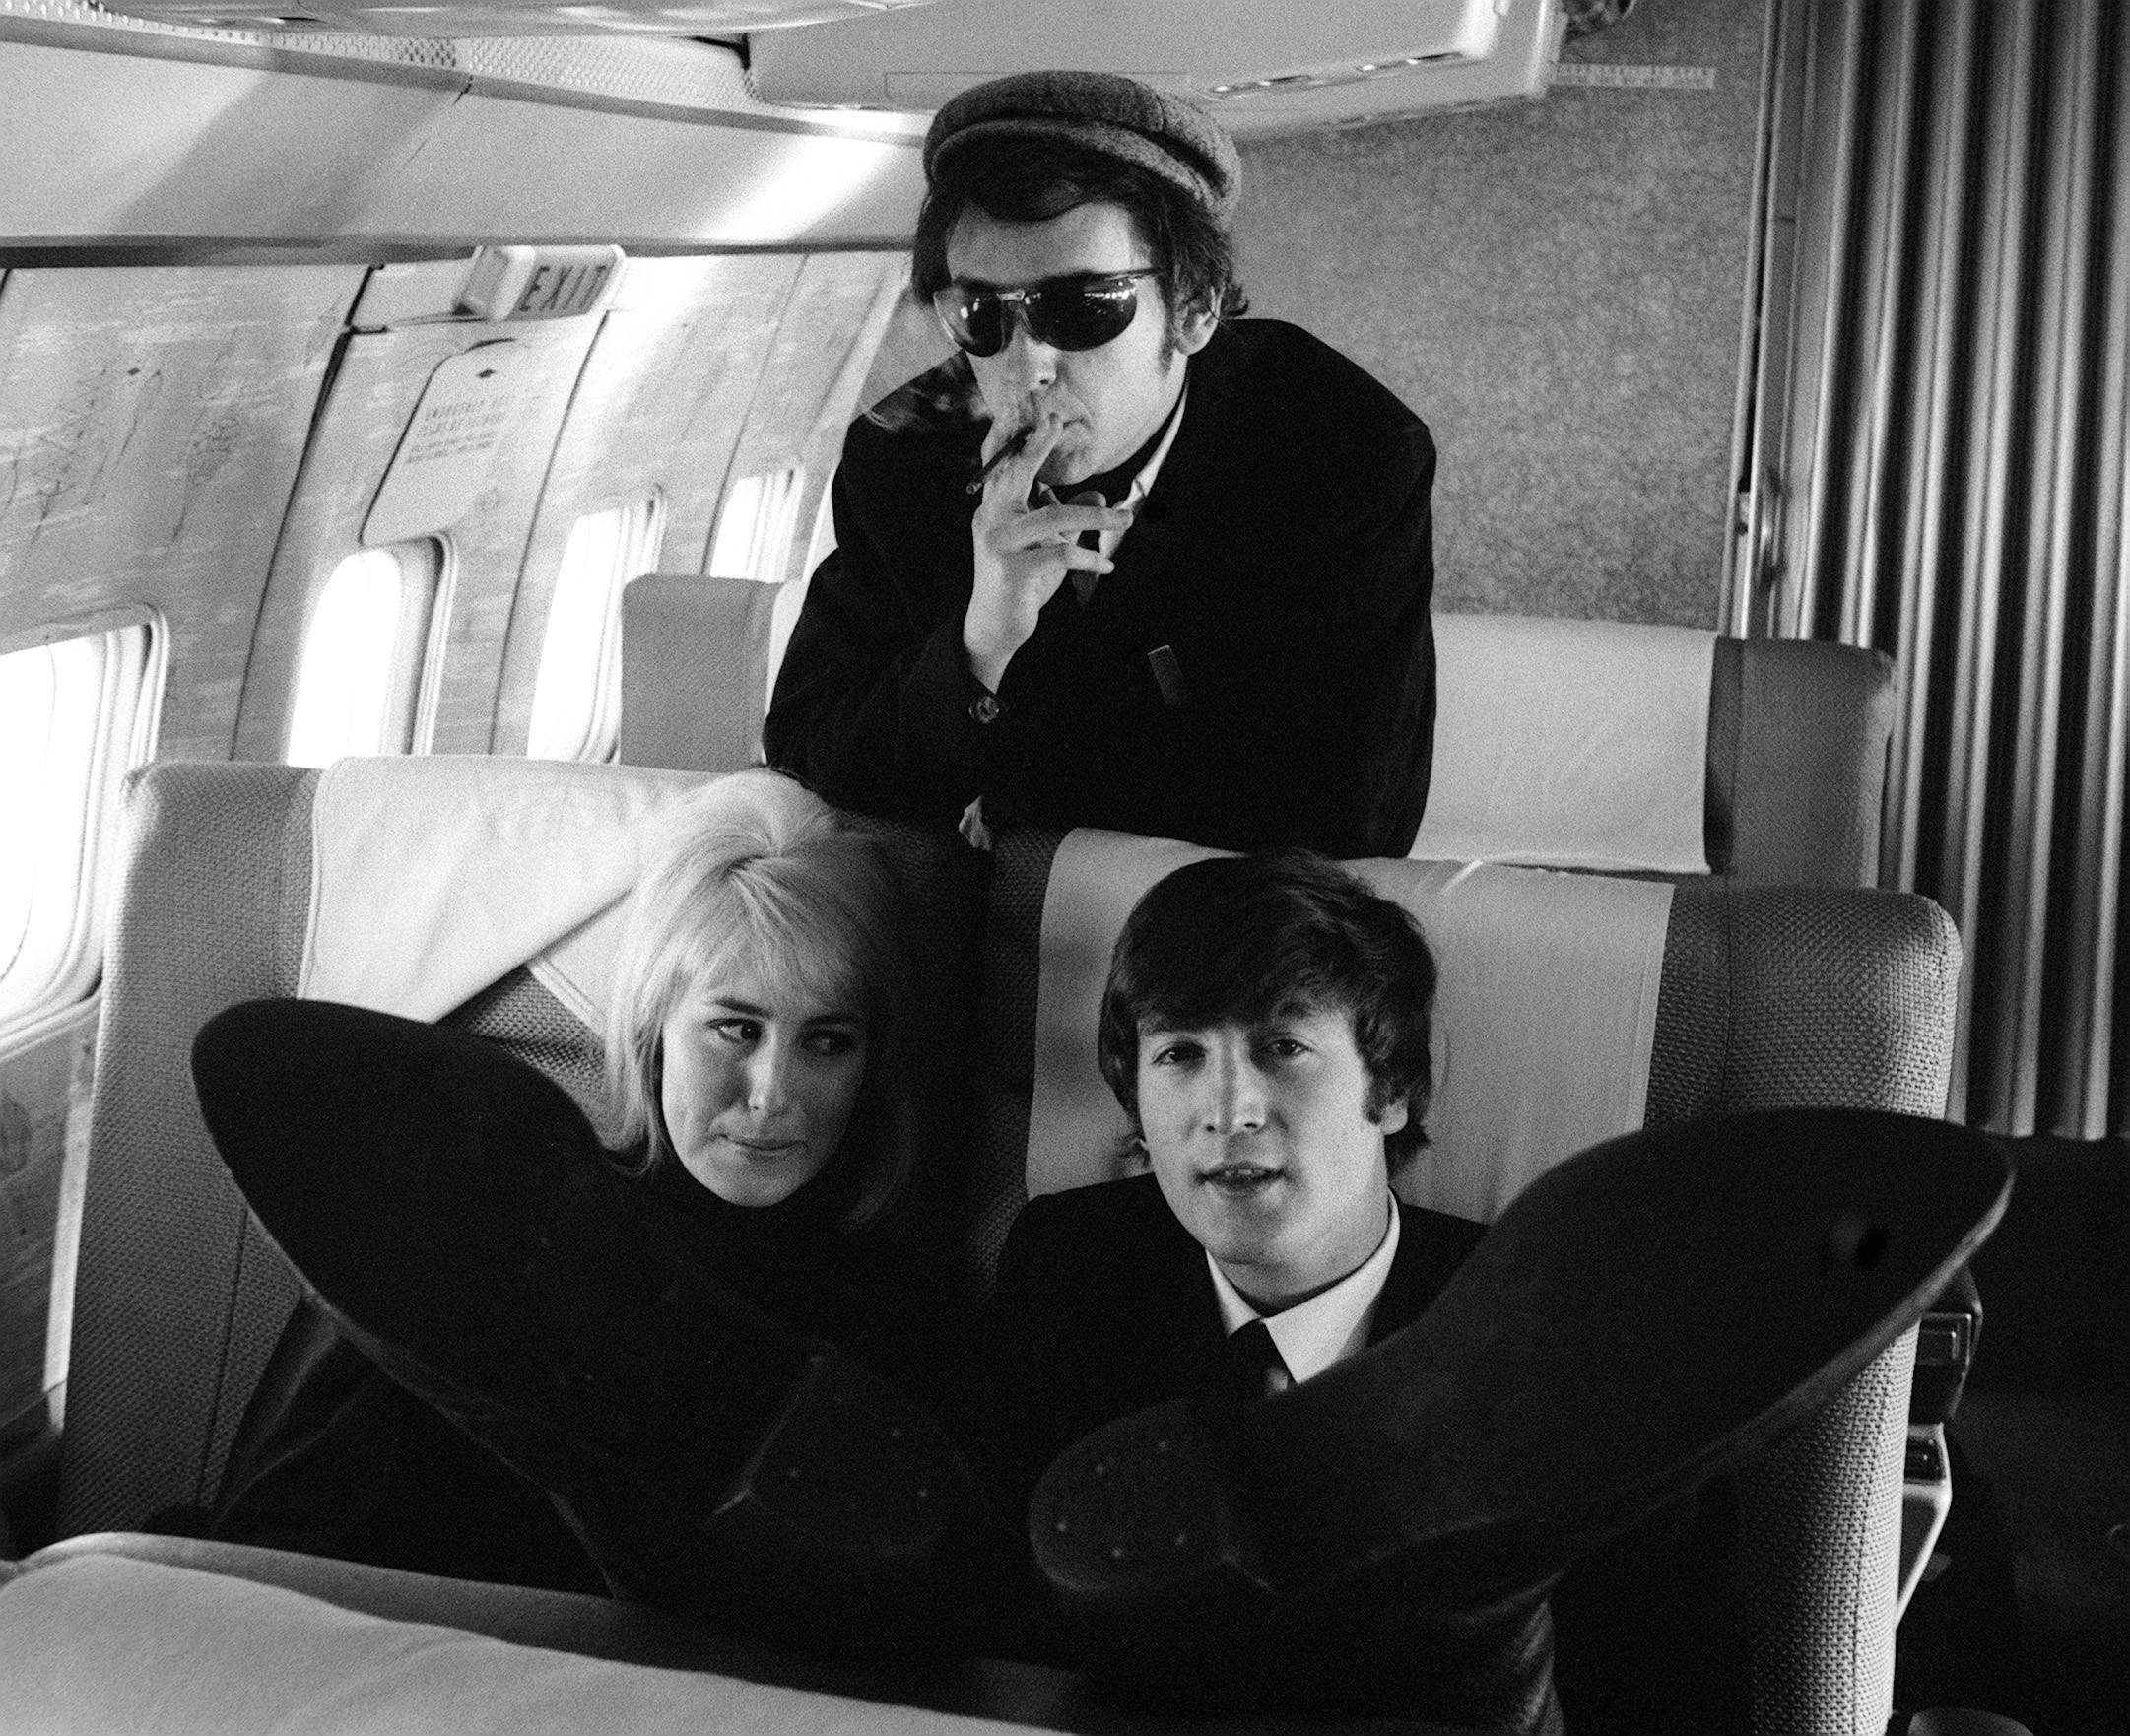 Phil Spector, John Lennon, and Cynthia Lennon in black-and-white during The Beatles' "The Long and Winding Road" era